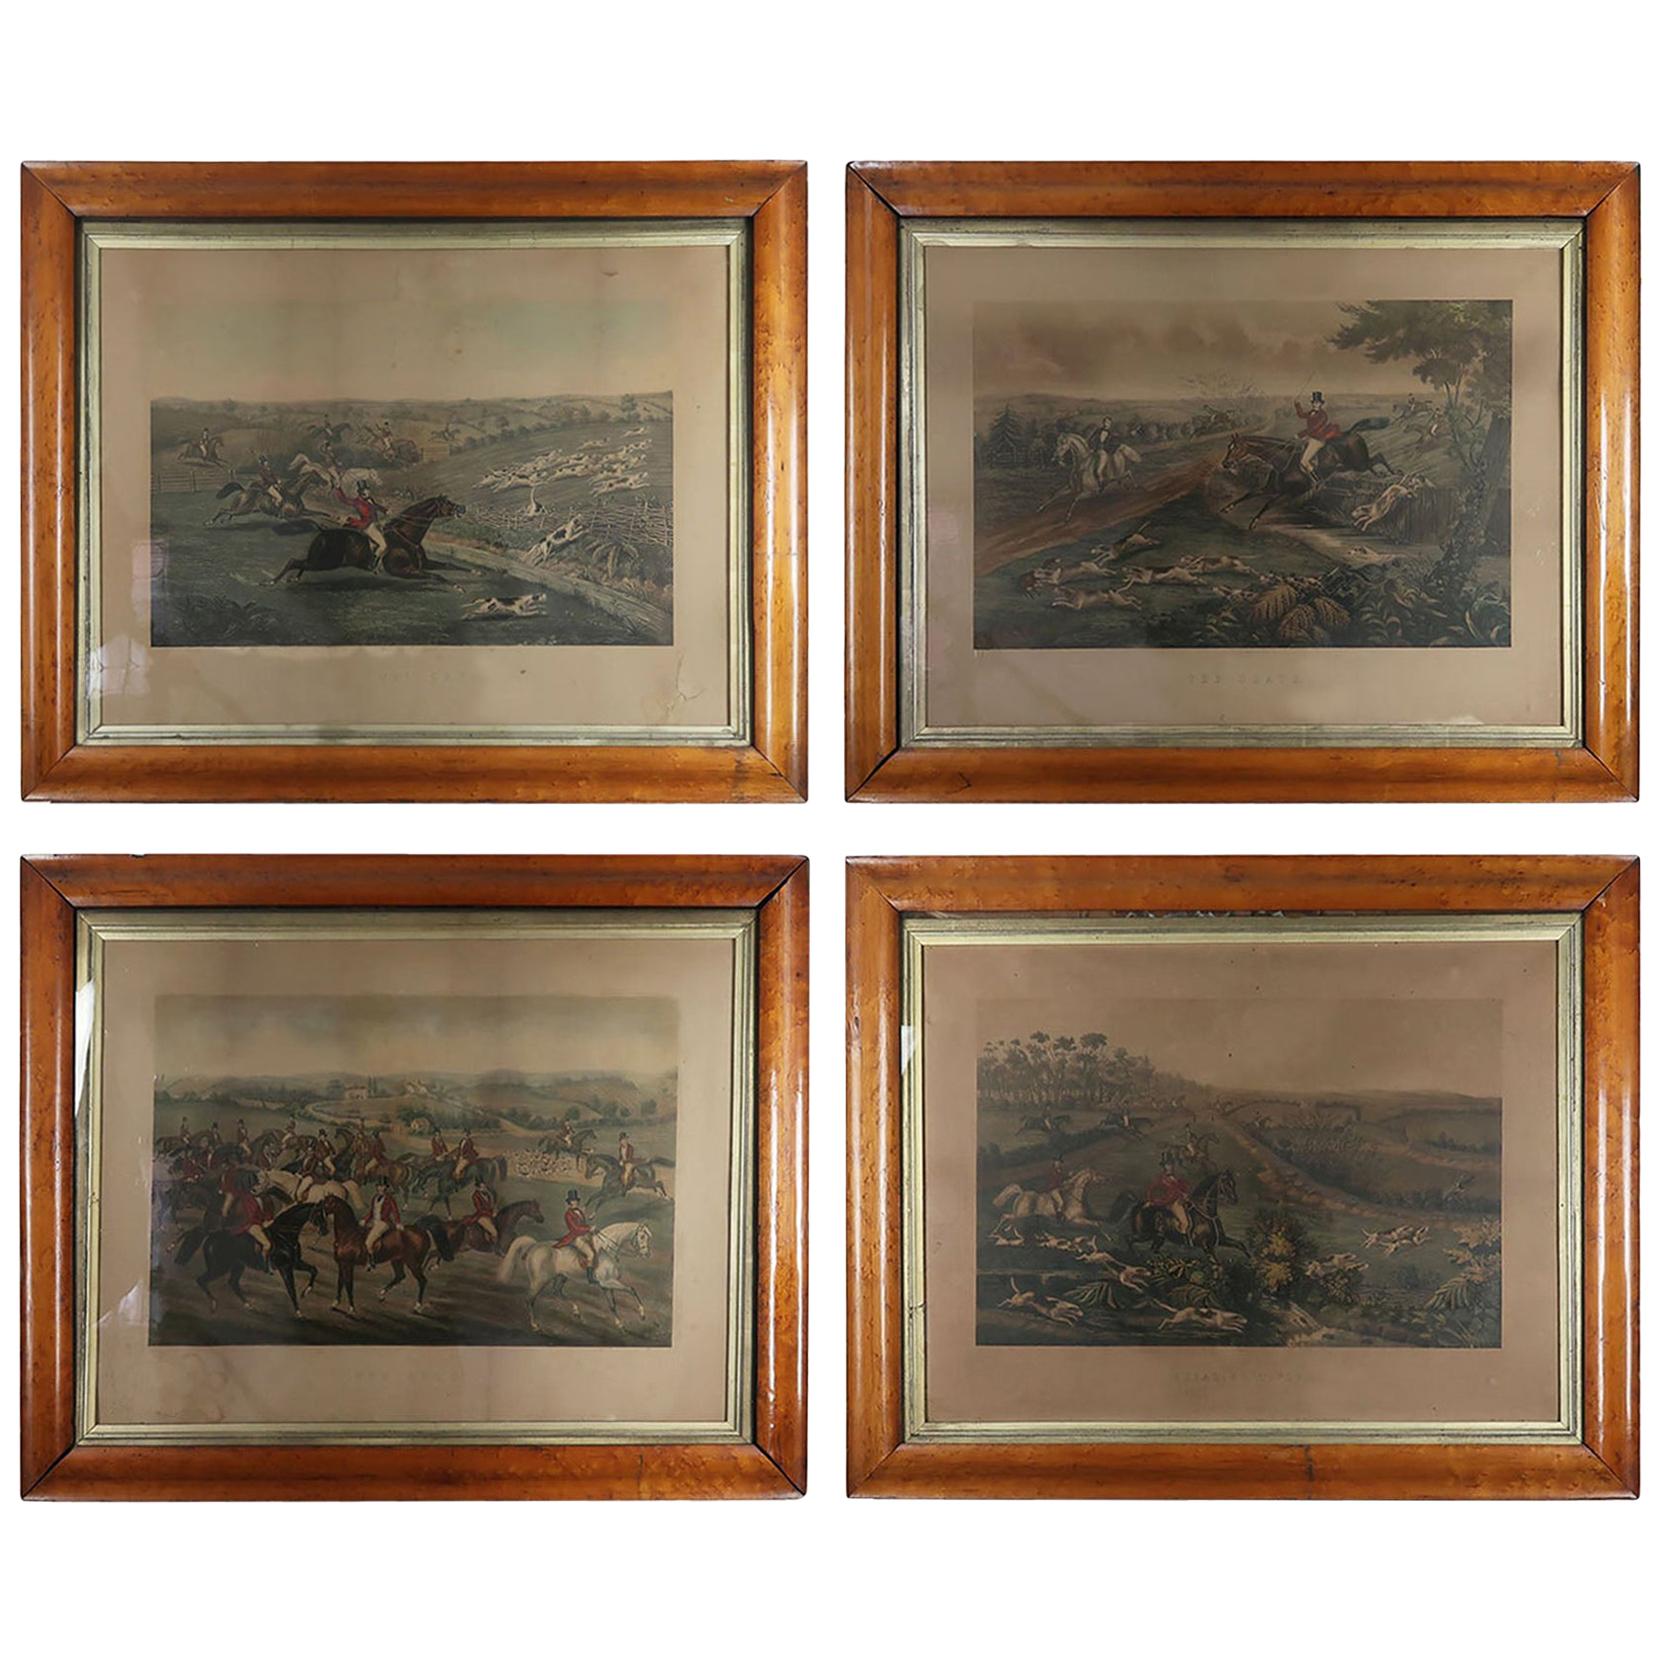 Set of 4 Large Scale Antique Sporting Prints, German, Mid-19th Century